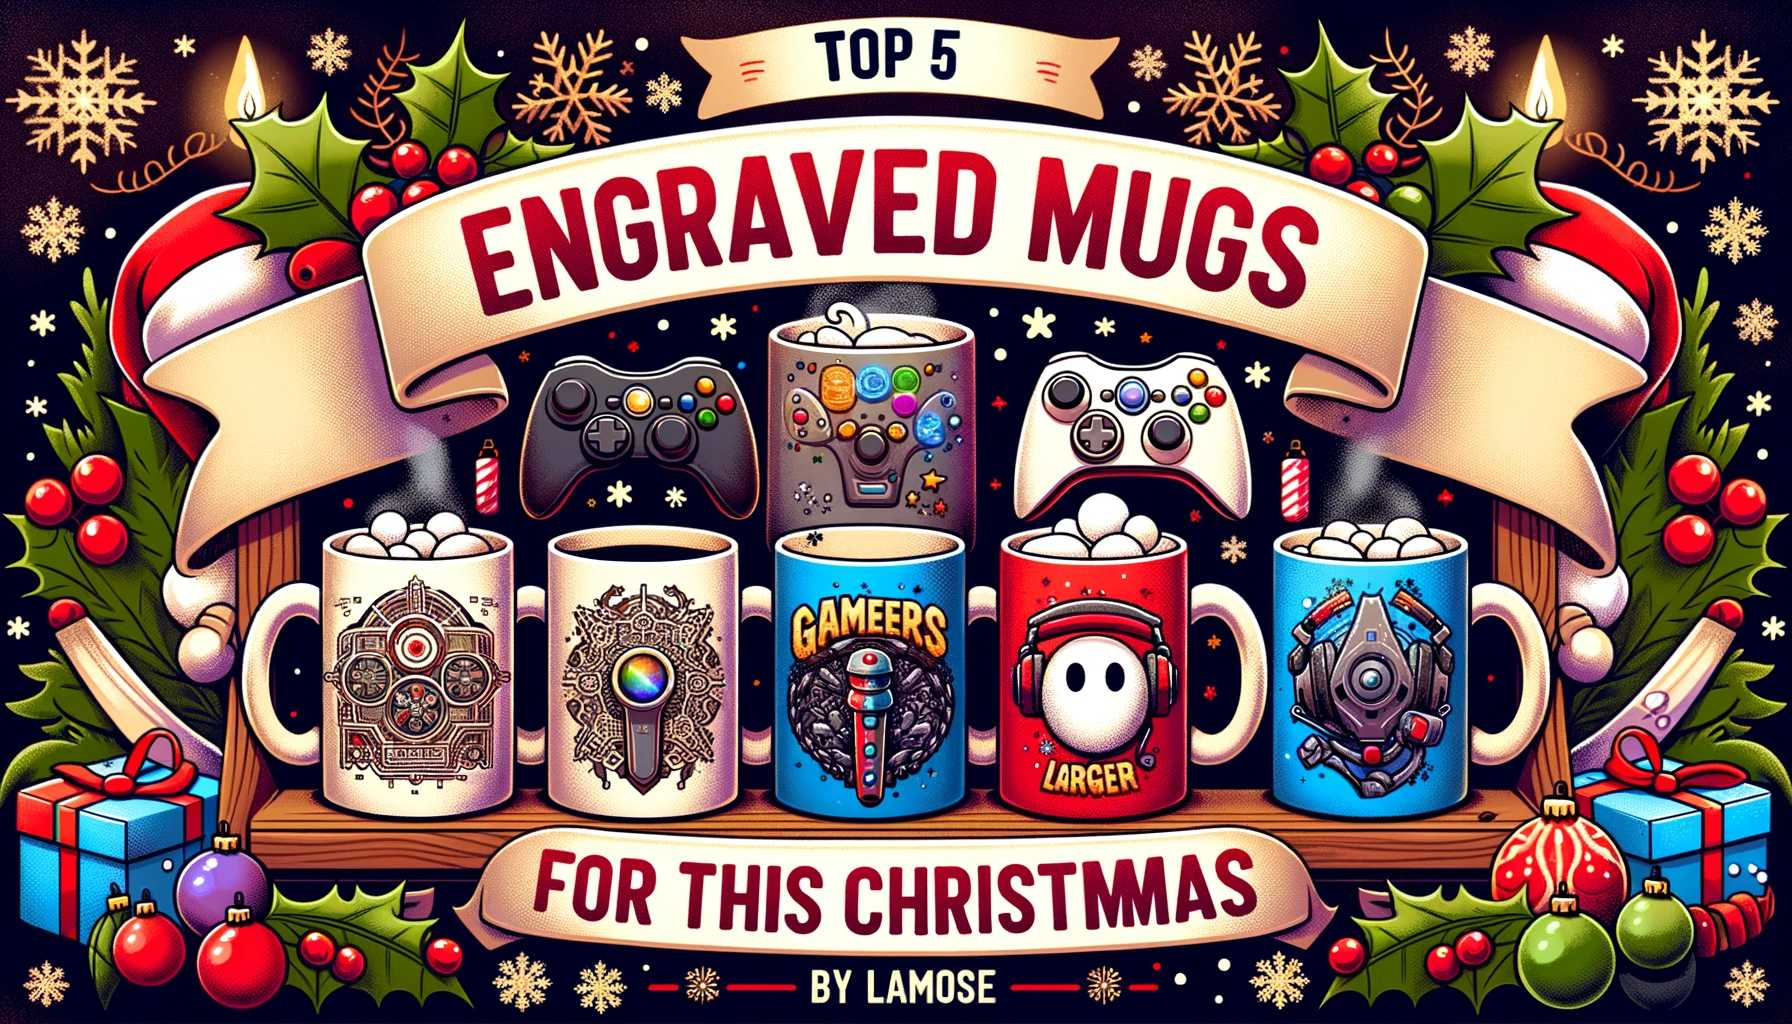 Top 5 Engraved Mugs for Gamers this Christmas by LAMOSE